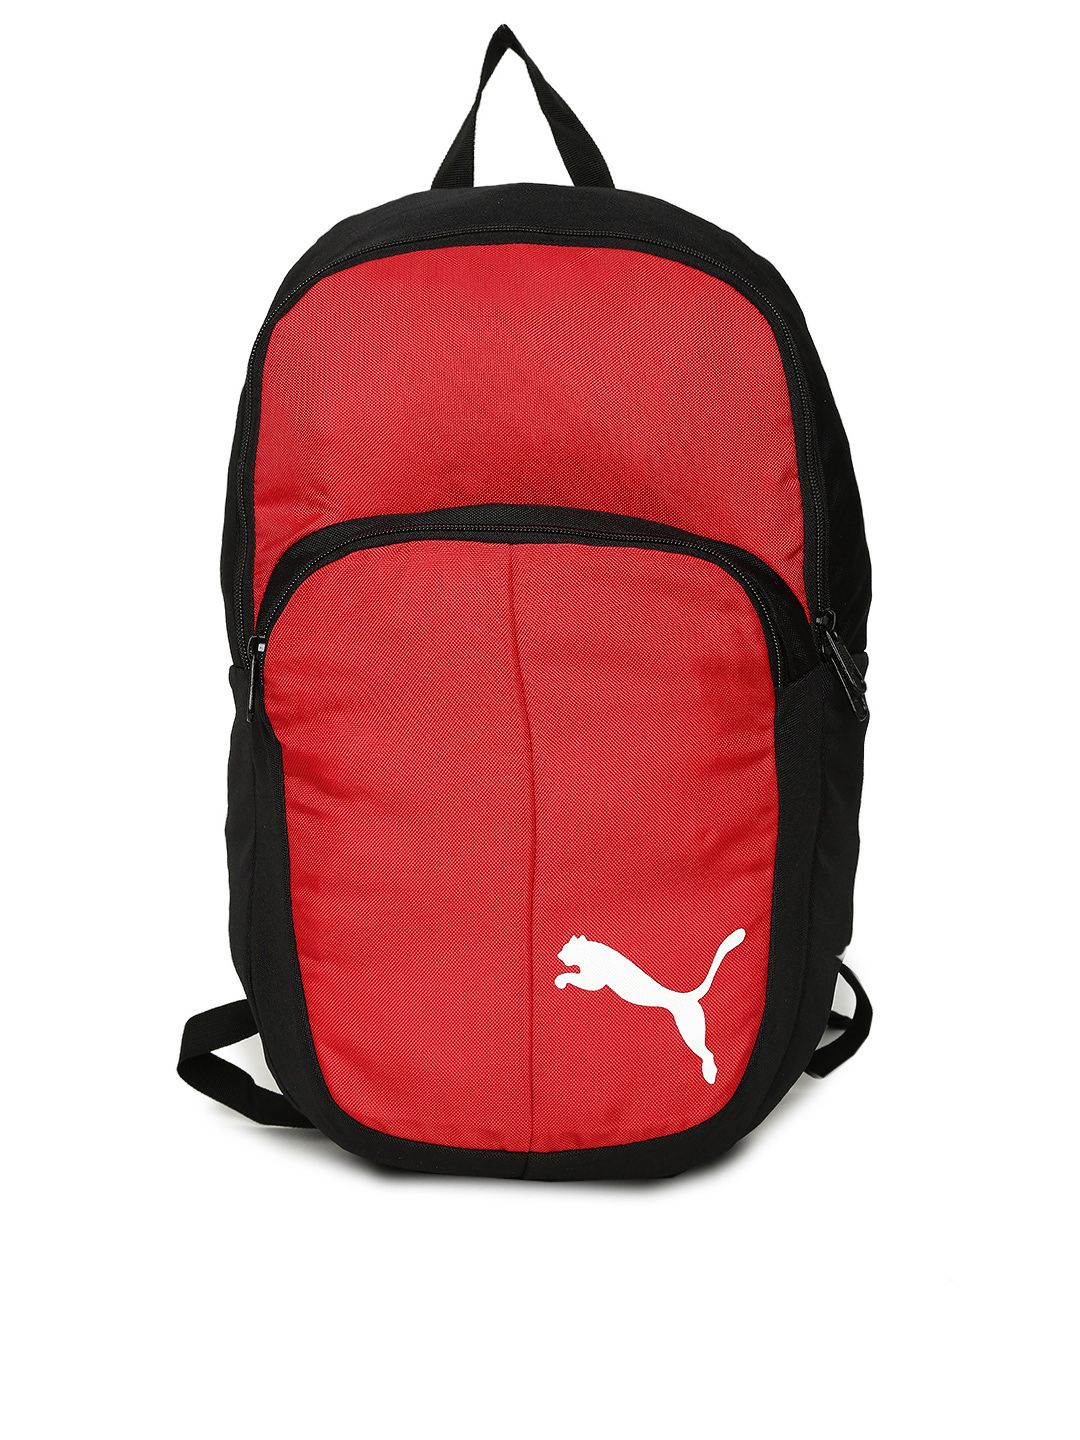 Puma Unisex Red Solid Backpack Price in India